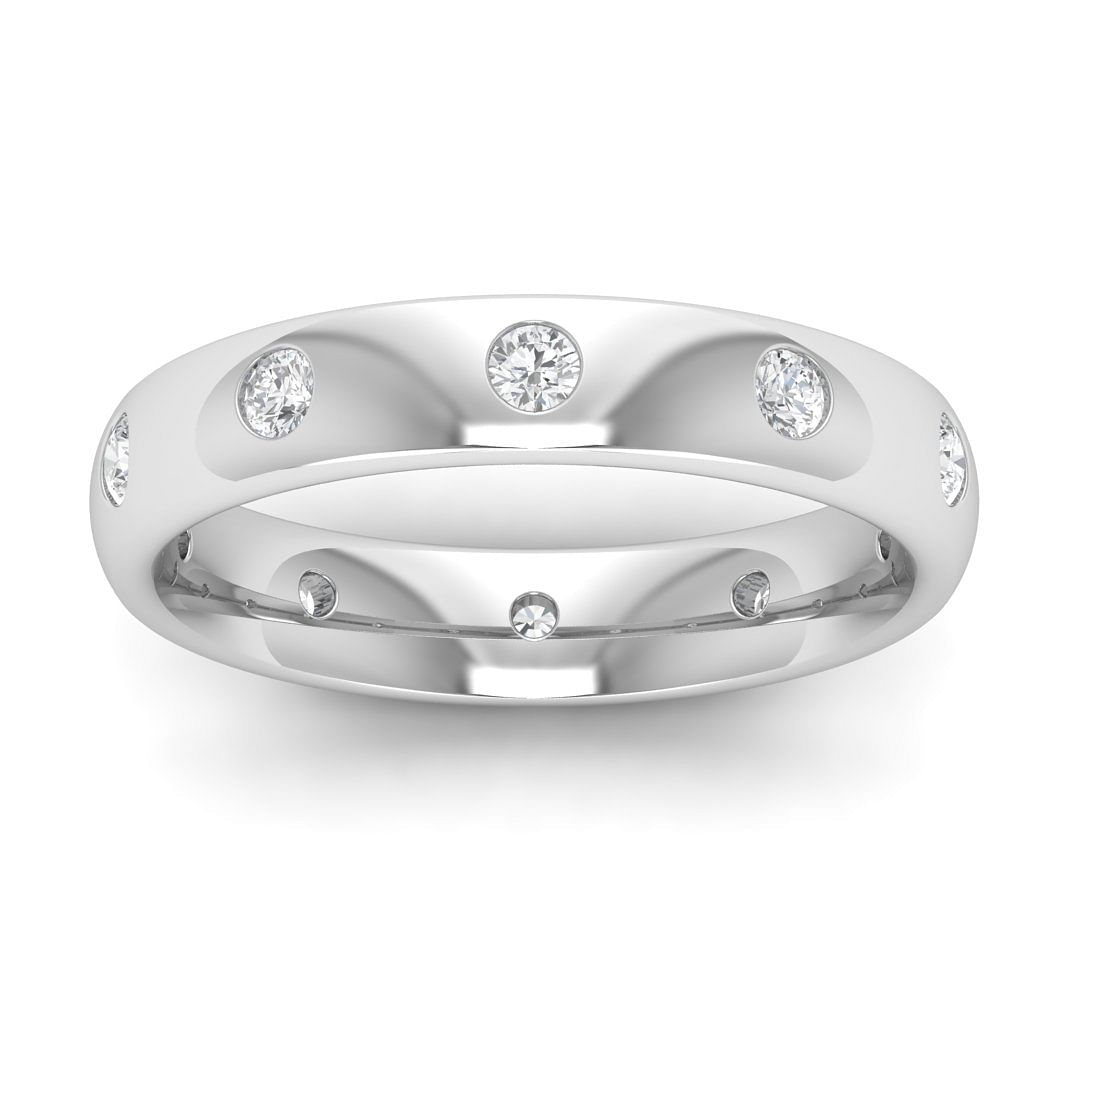 Wedding Diamond Ring With White Gold For Her